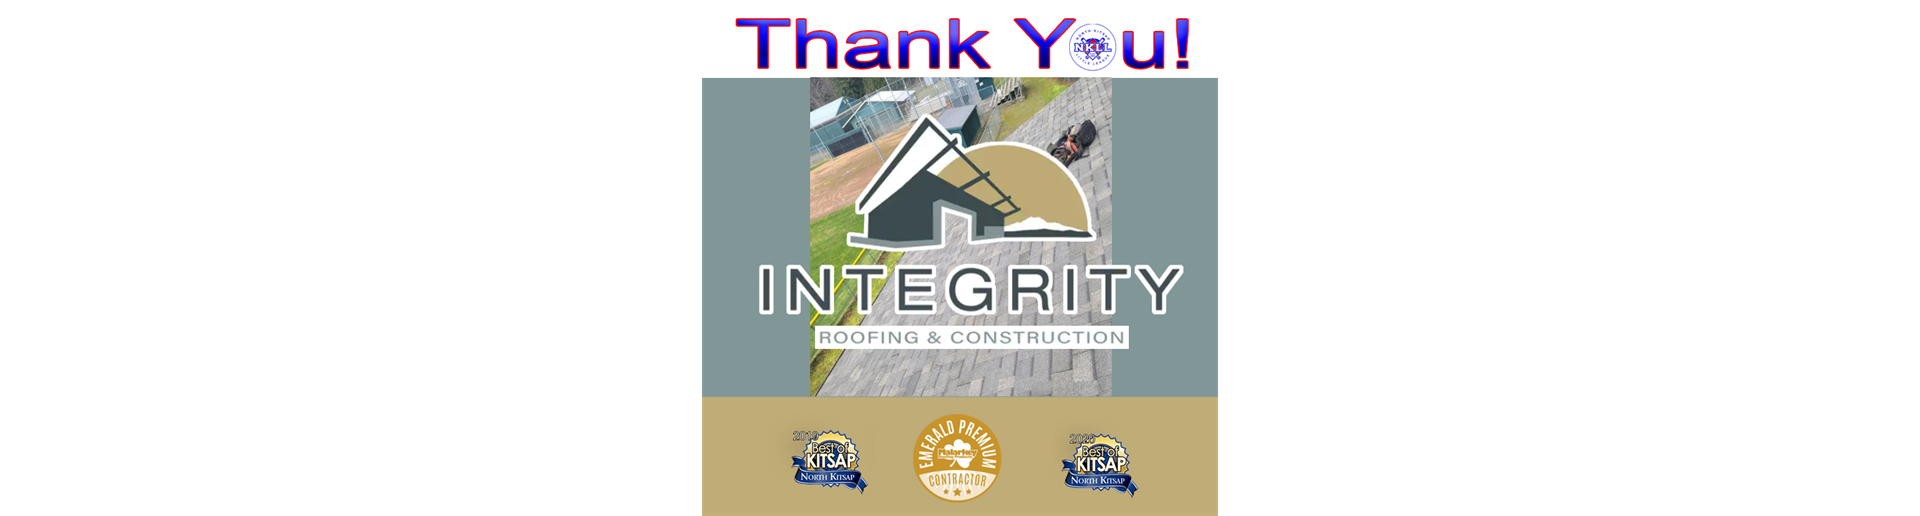 Thank You to Integrity Roofing!